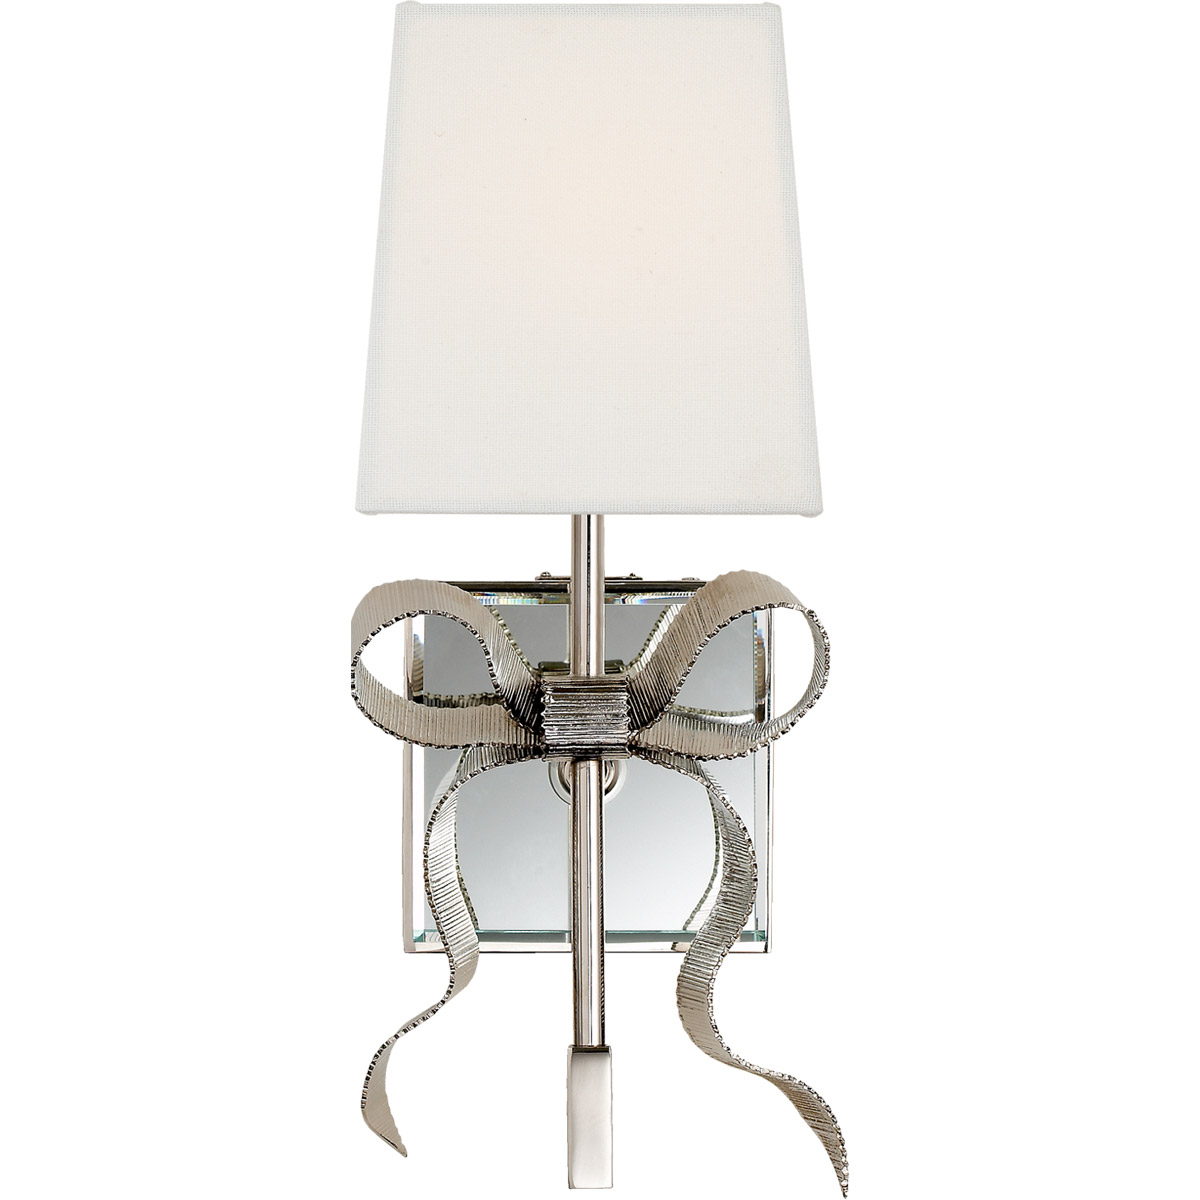 Linen, KS2008PN-L Nickel Collection new Comfort Cream Signature york 1 5 Gros-Grain Comfort Visual Small spade Light Polished inch kate Visual | Sconce Light Bow Ellery Wall in